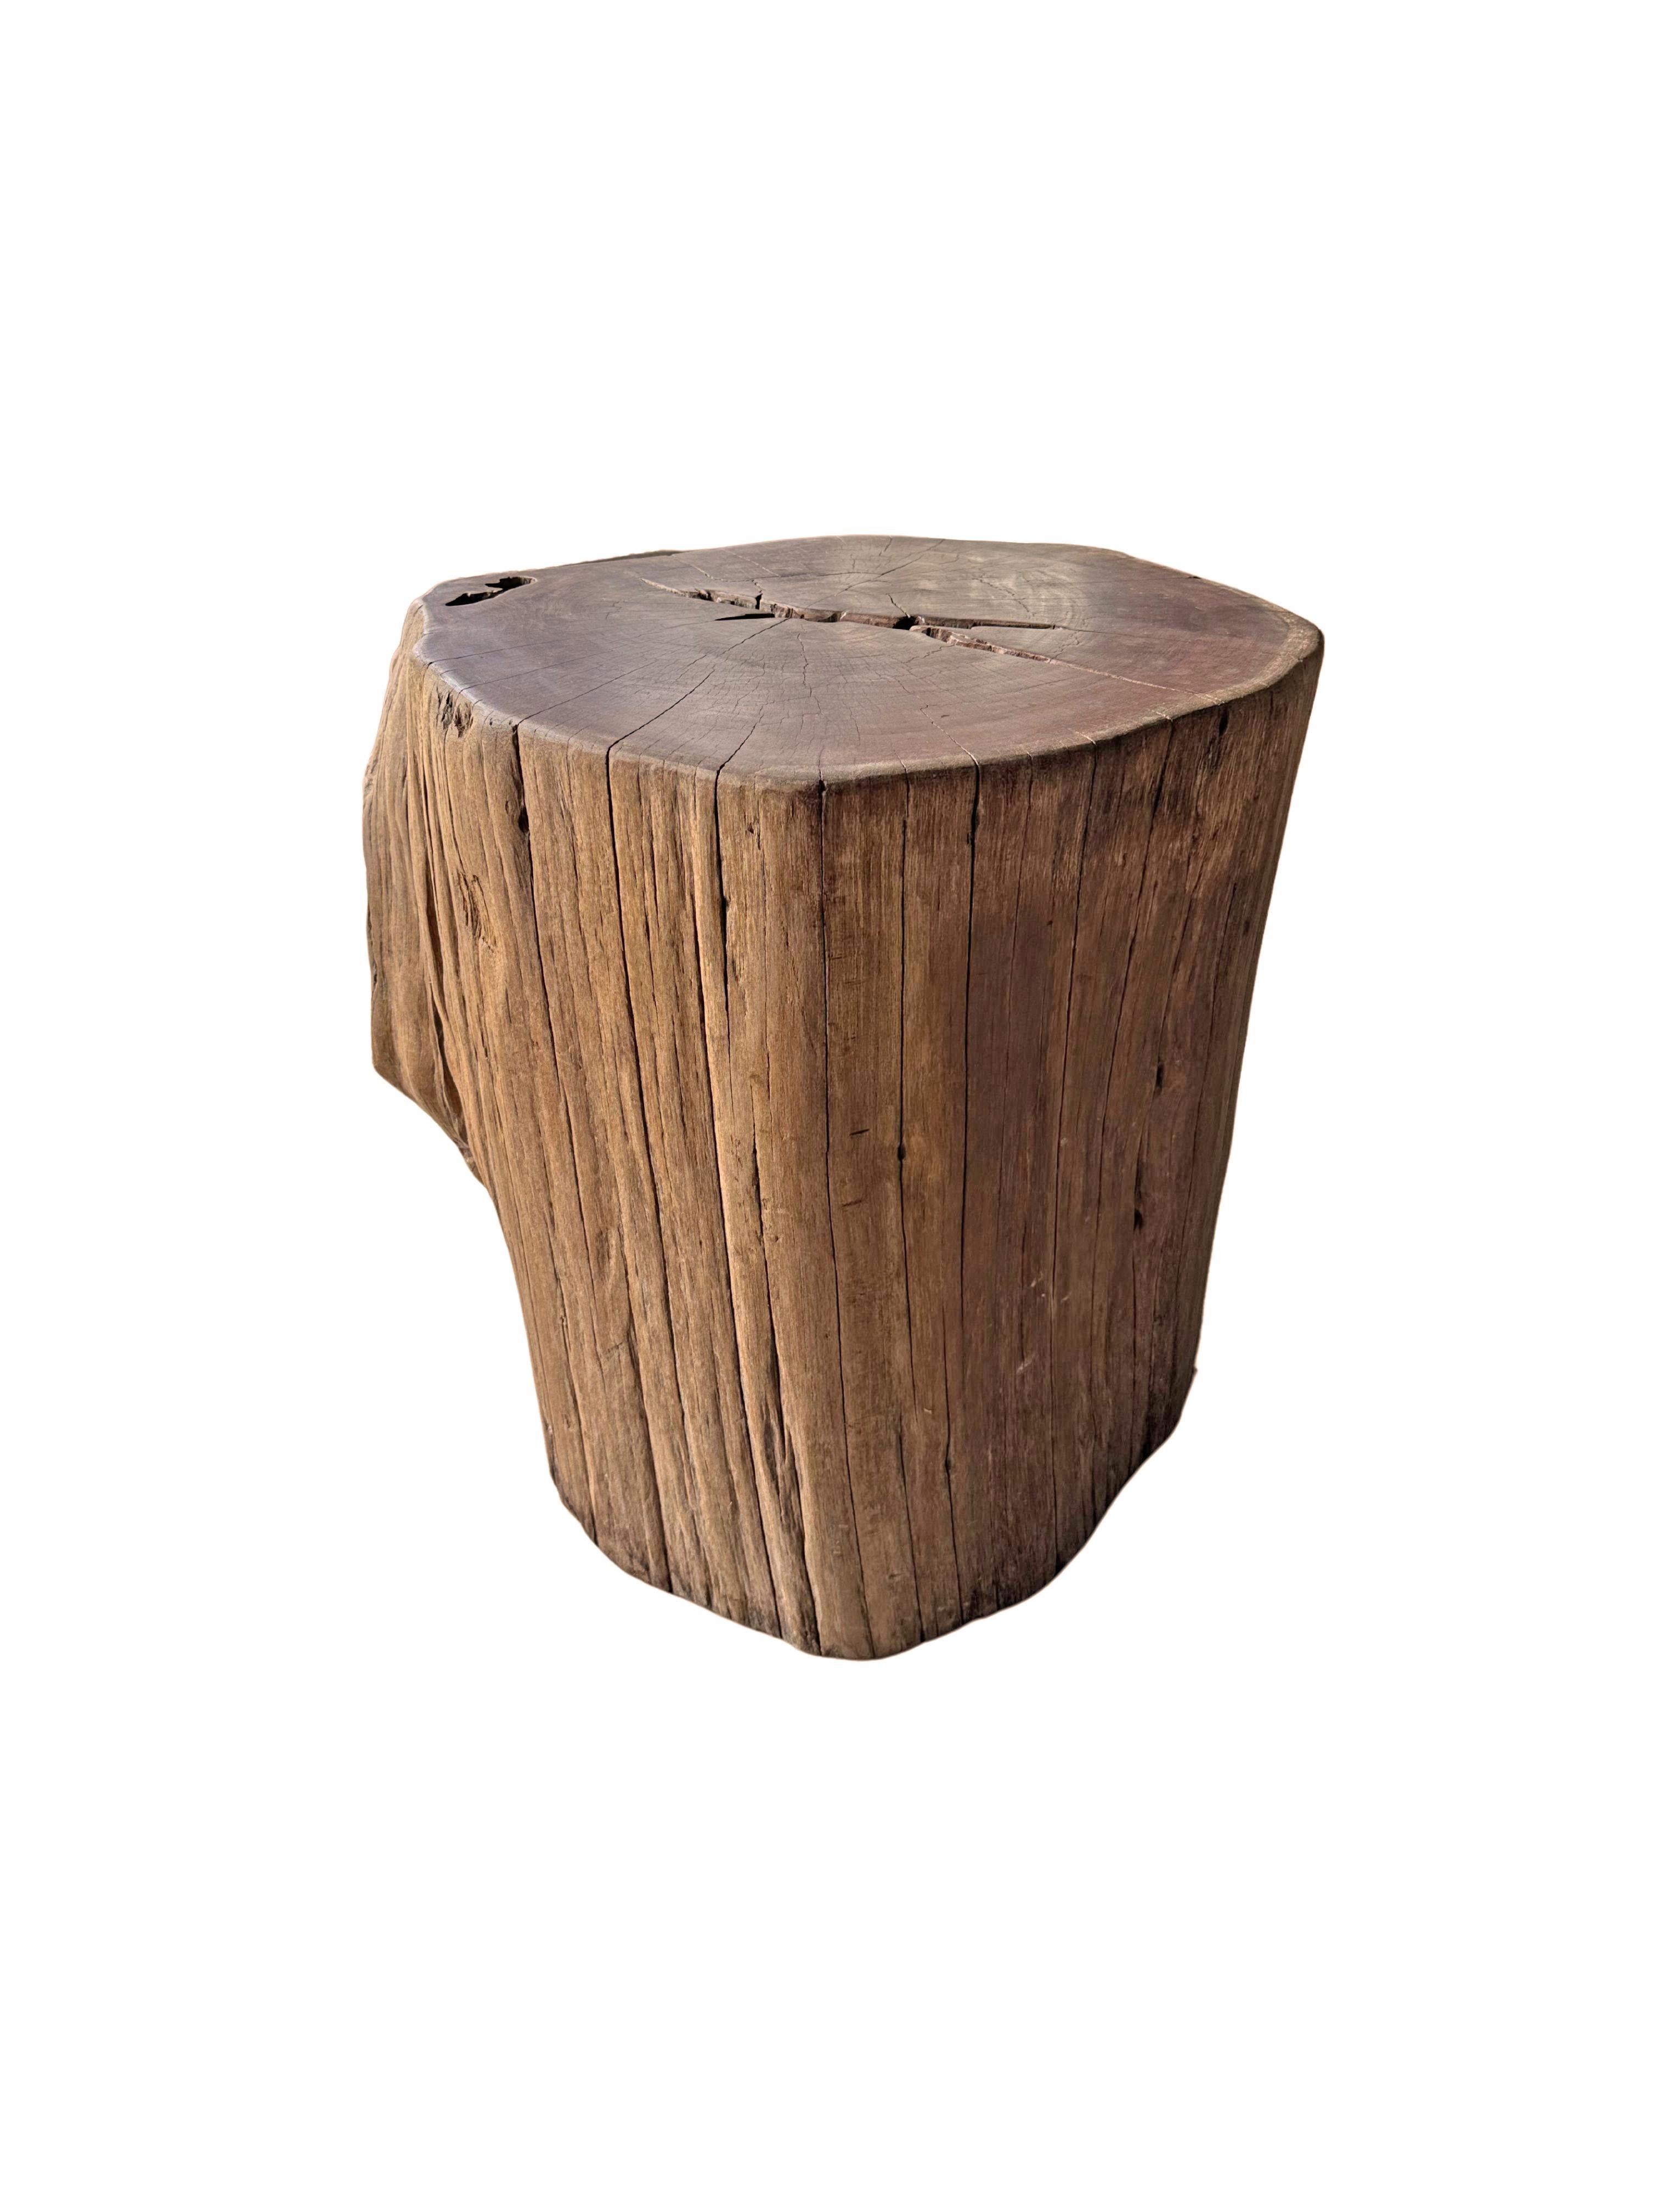 Other Large Raw Organic Solid Iron Wood Side Table 